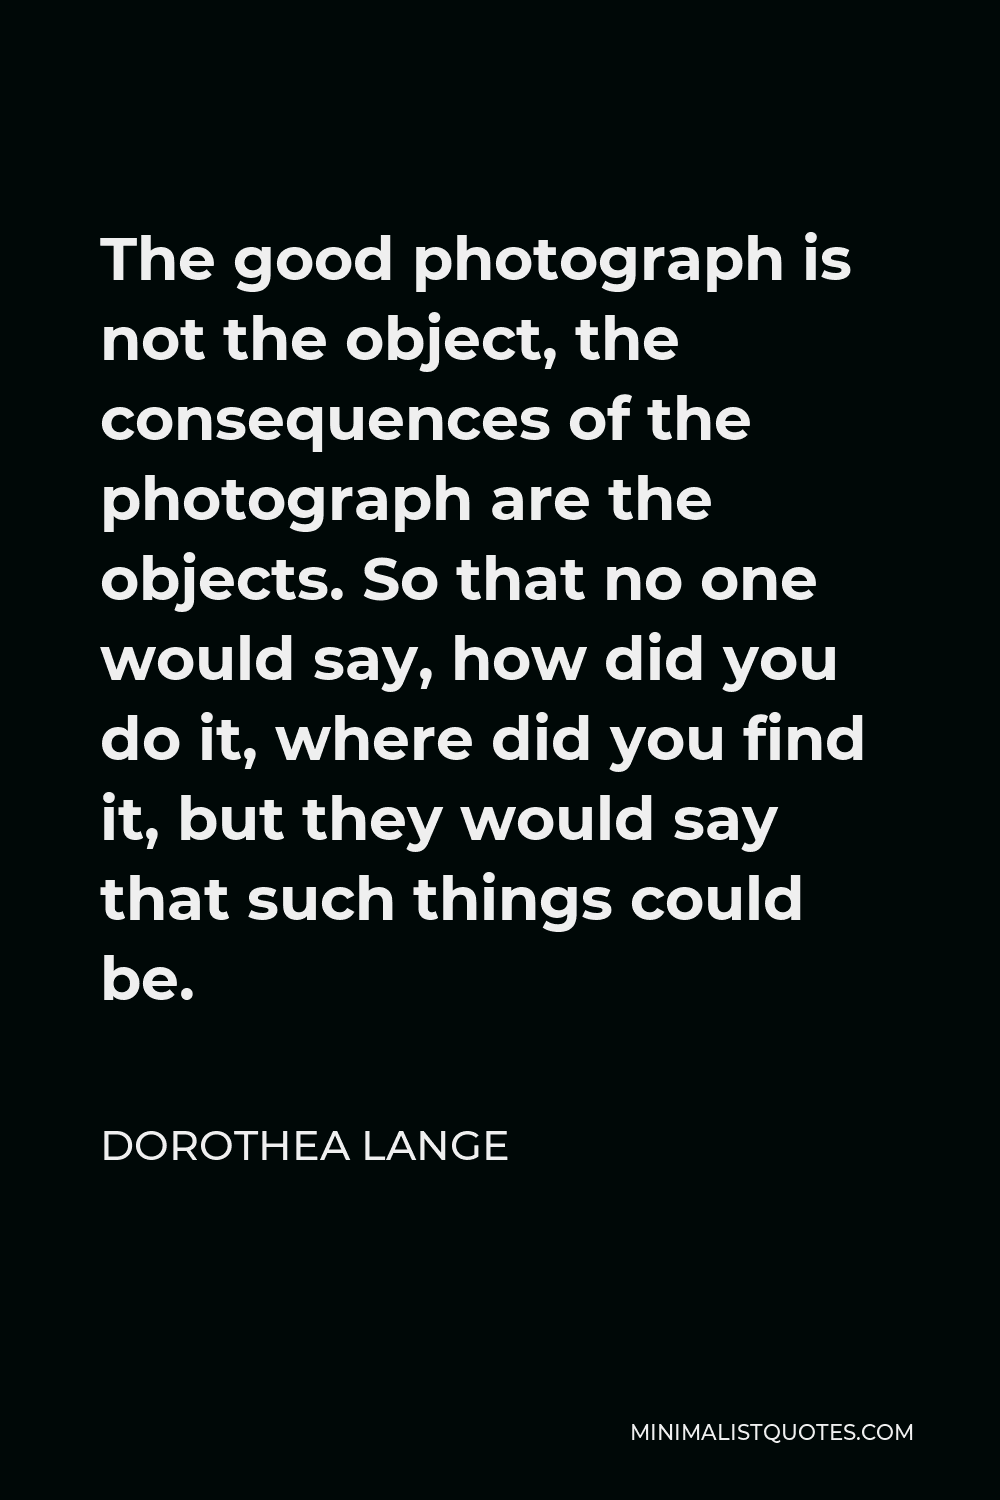 Dorothea Lange Quote - The good photograph is not the object, the consequences of the photograph are the objects. So that no one would say, how did you do it, where did you find it, but they would say that such things could be.